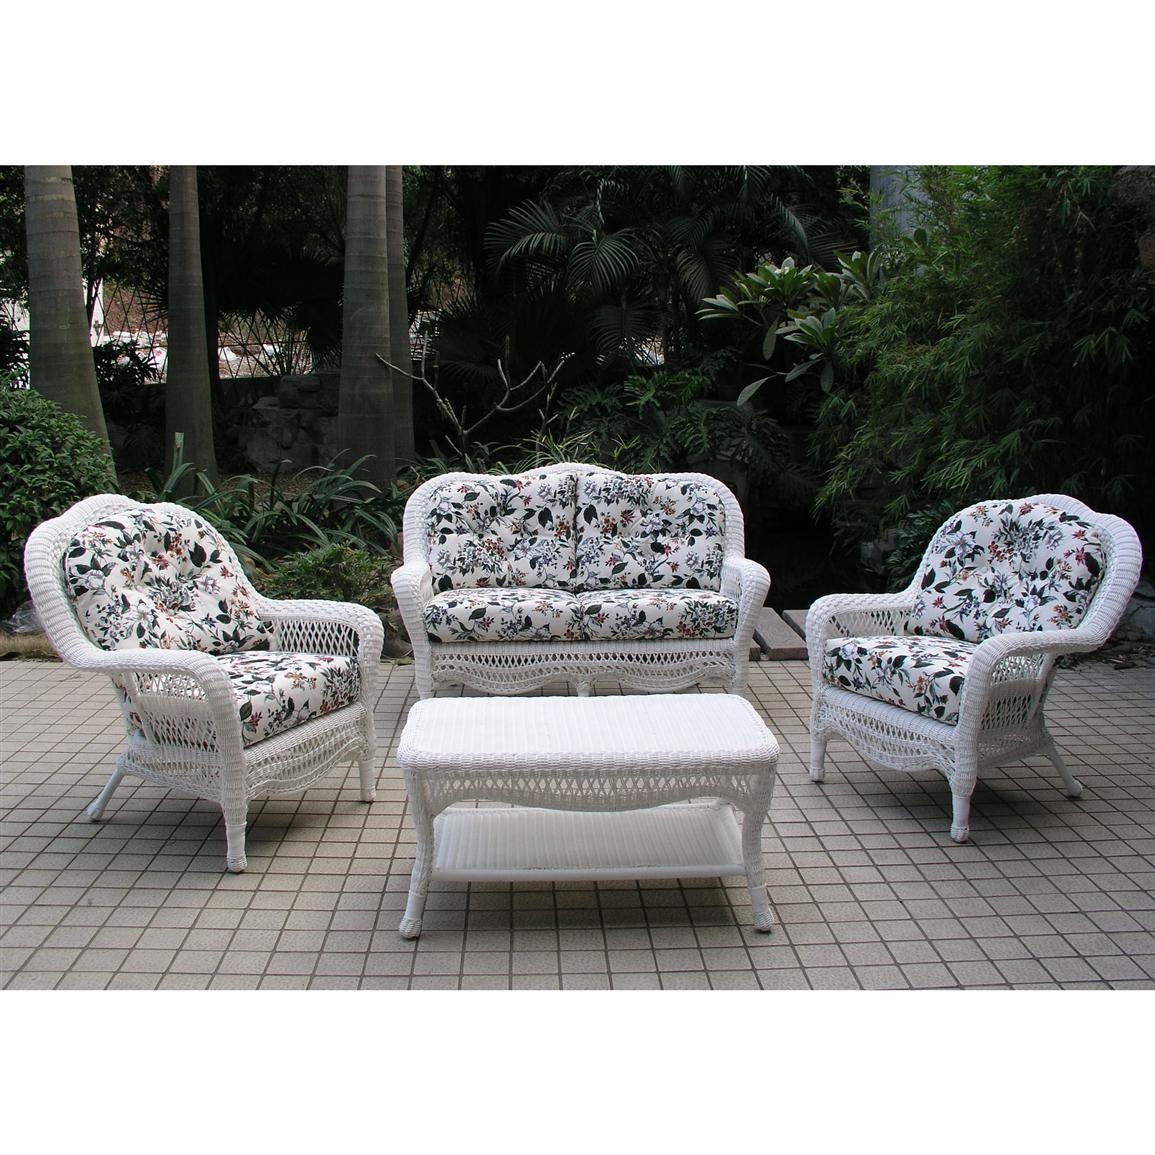 Wicker Patio Furniture Clearance - Have to have it. Fiji Bay All